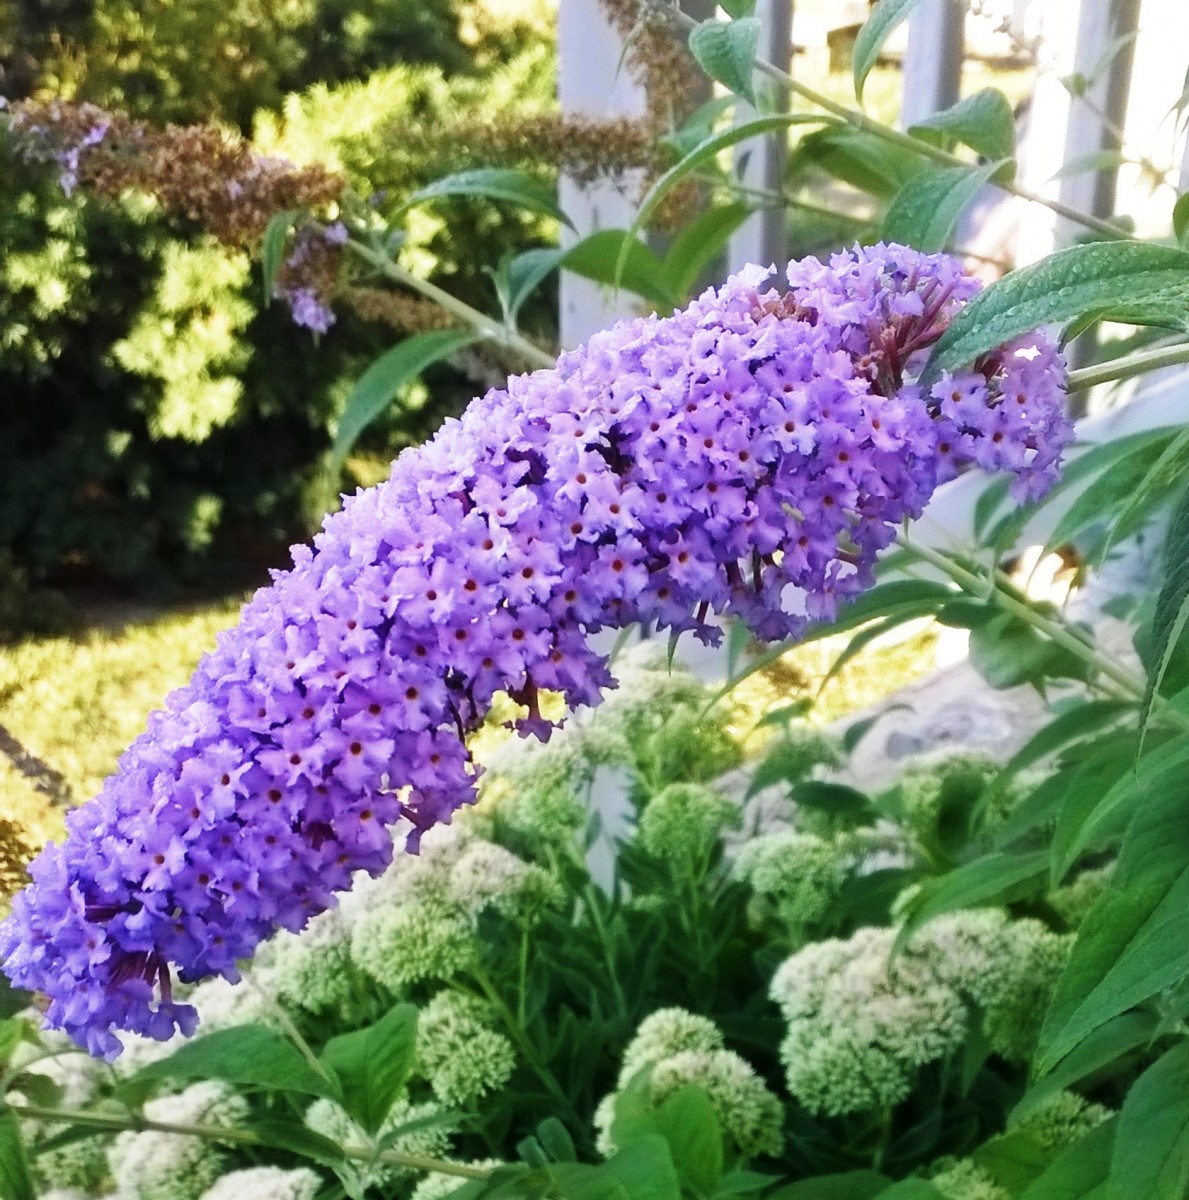 Albums 92+ Background Images Show Me A Picture Of A Butterfly Bush Sharp